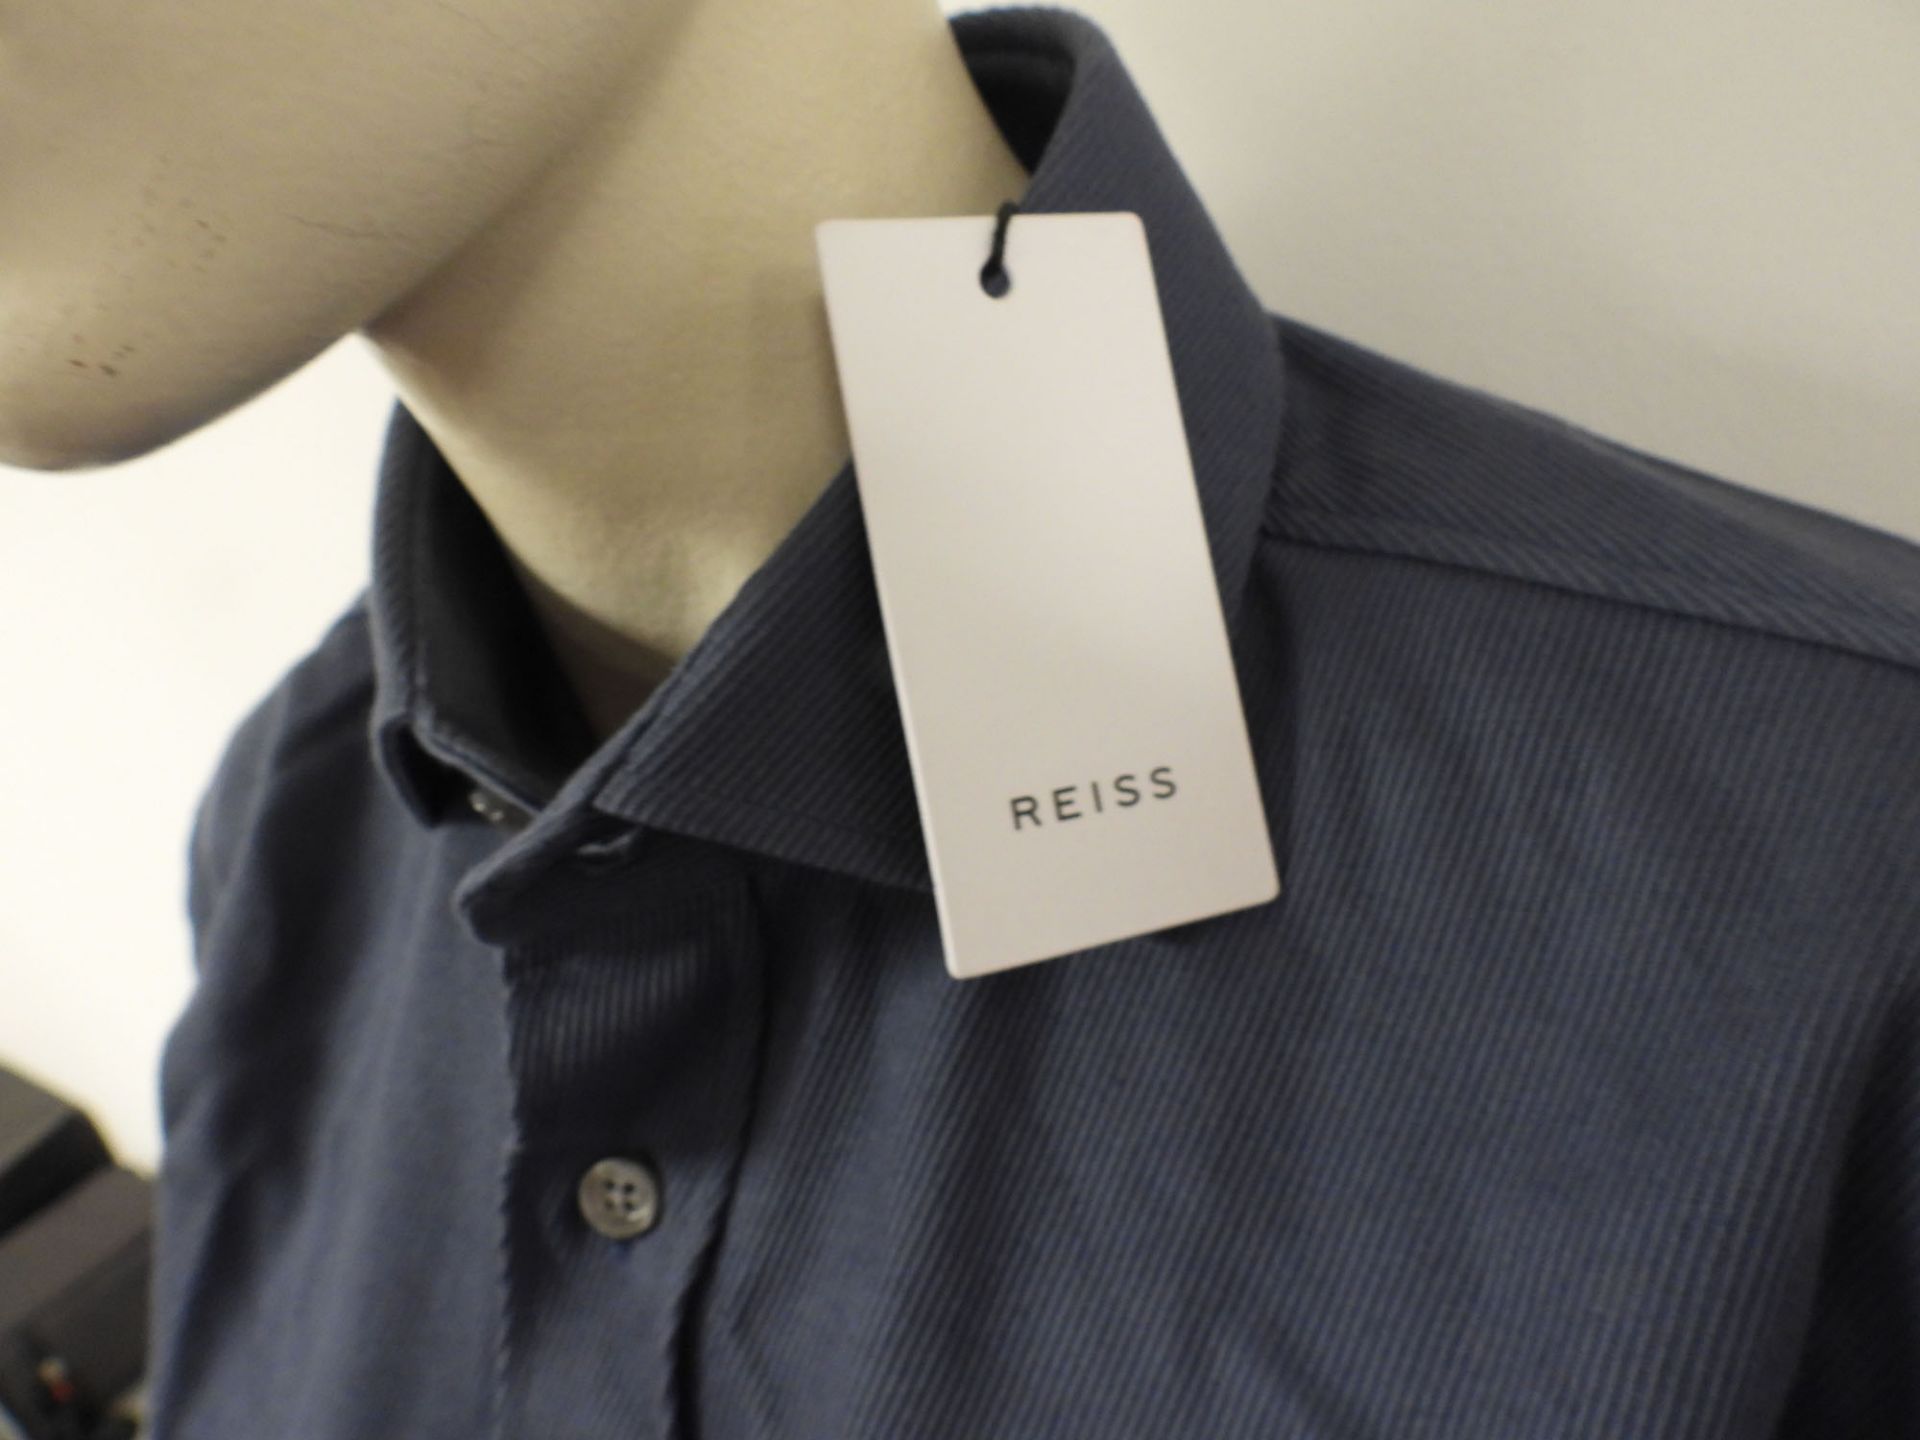 Reiss heavy twill overshirt in air force blue, size medium - Image 2 of 2